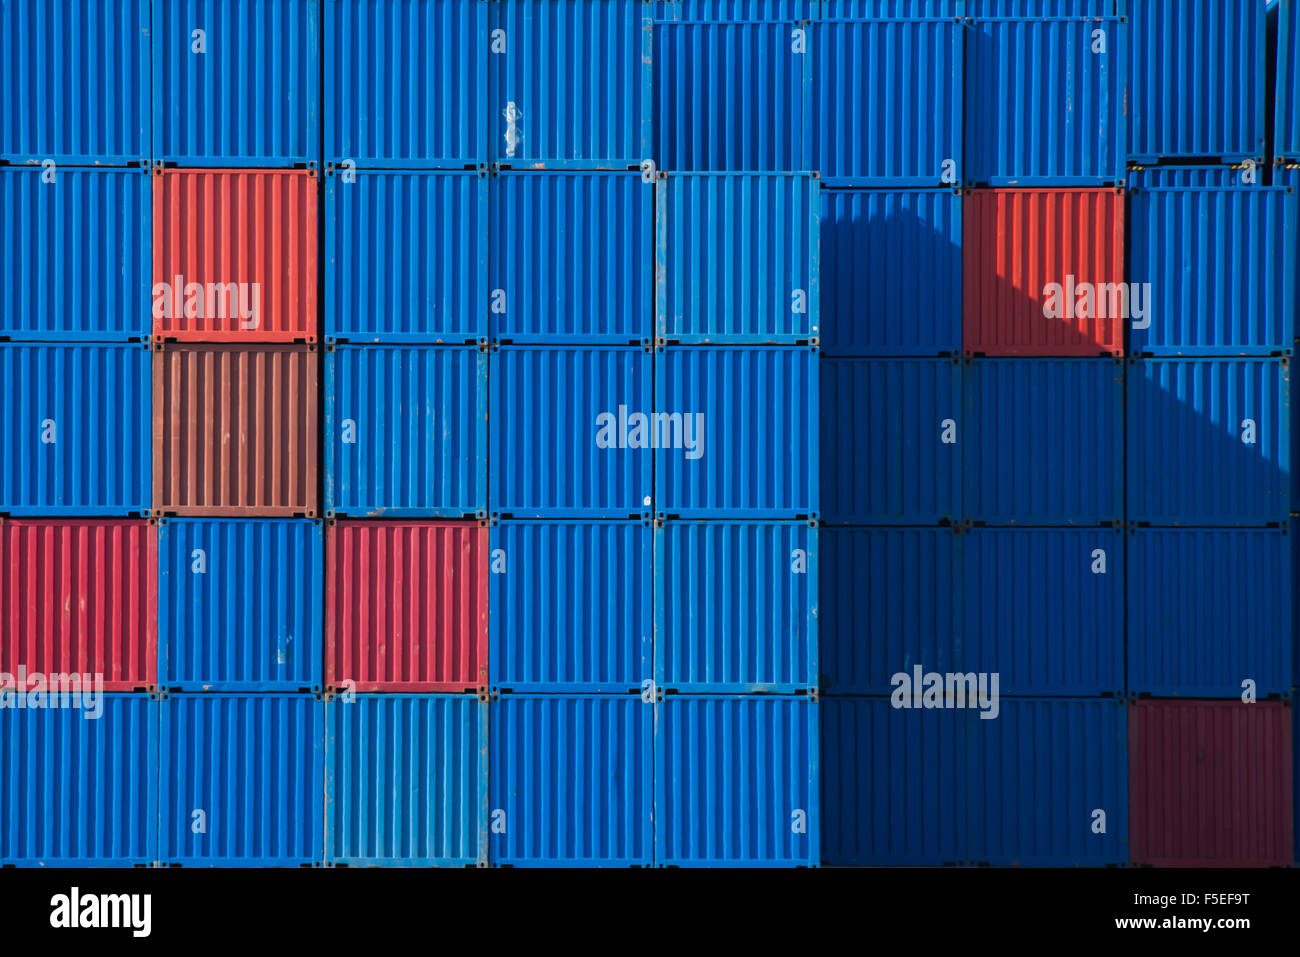 Stacks of shipping containers in a row Stock Photo